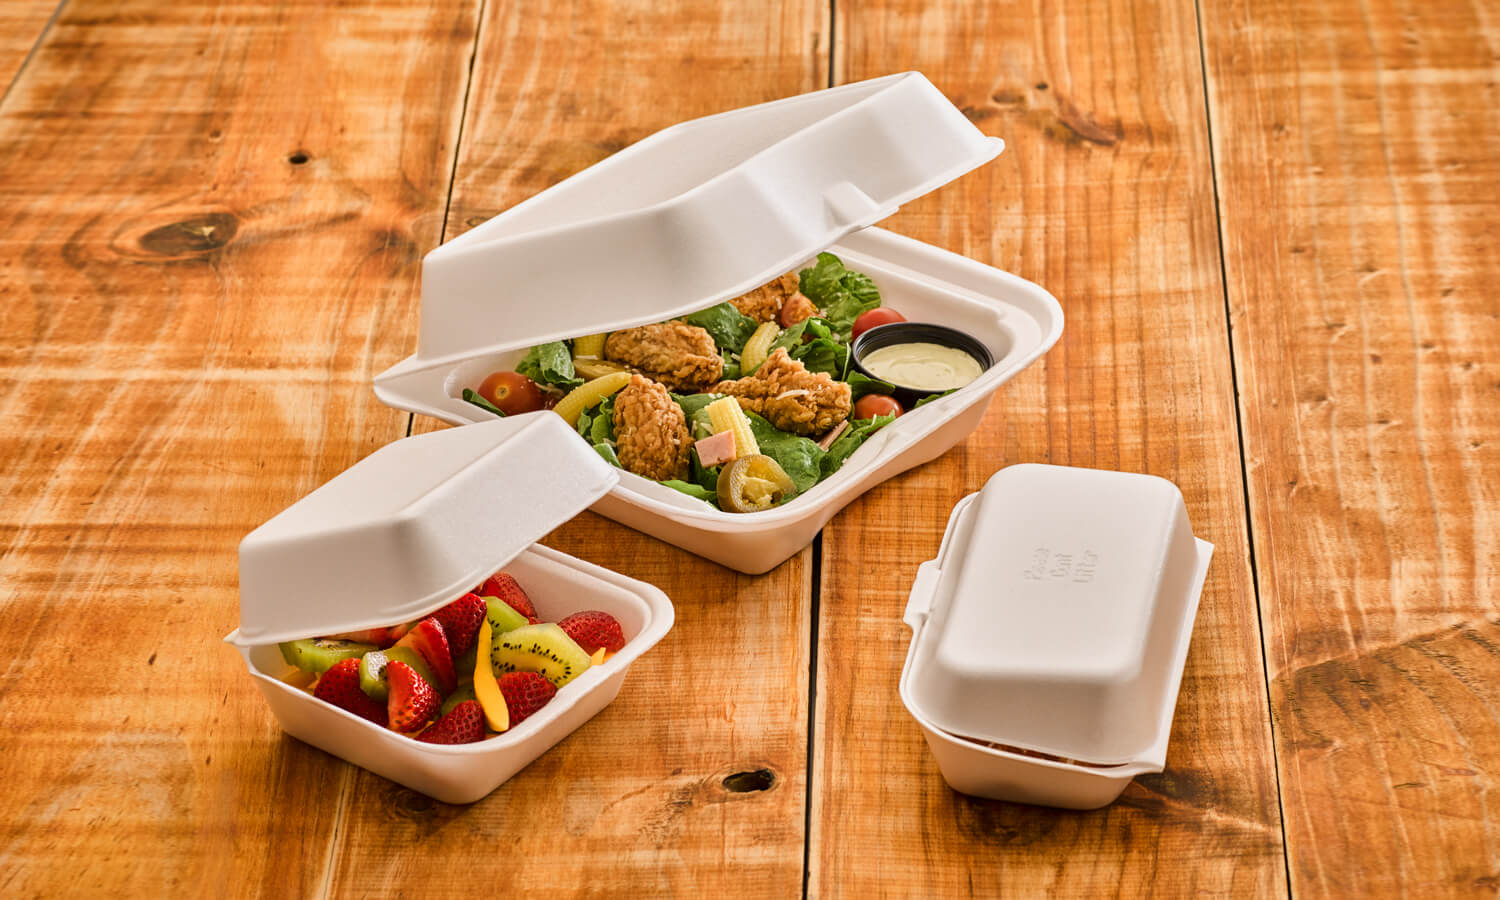 foam-hinged-lid-containers